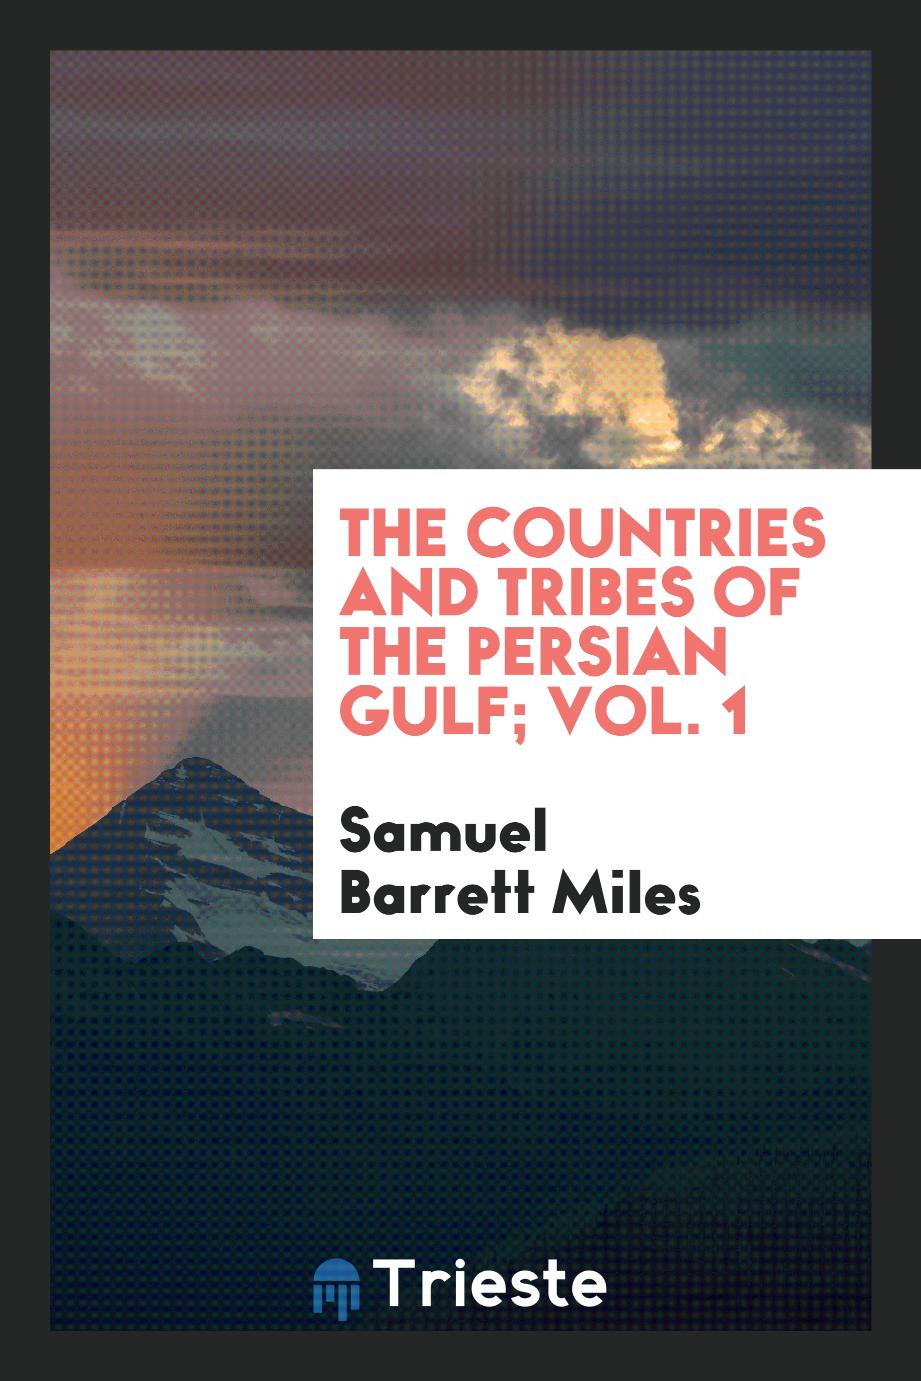 The countries and tribes of the Persian Gulf; Vol. 1